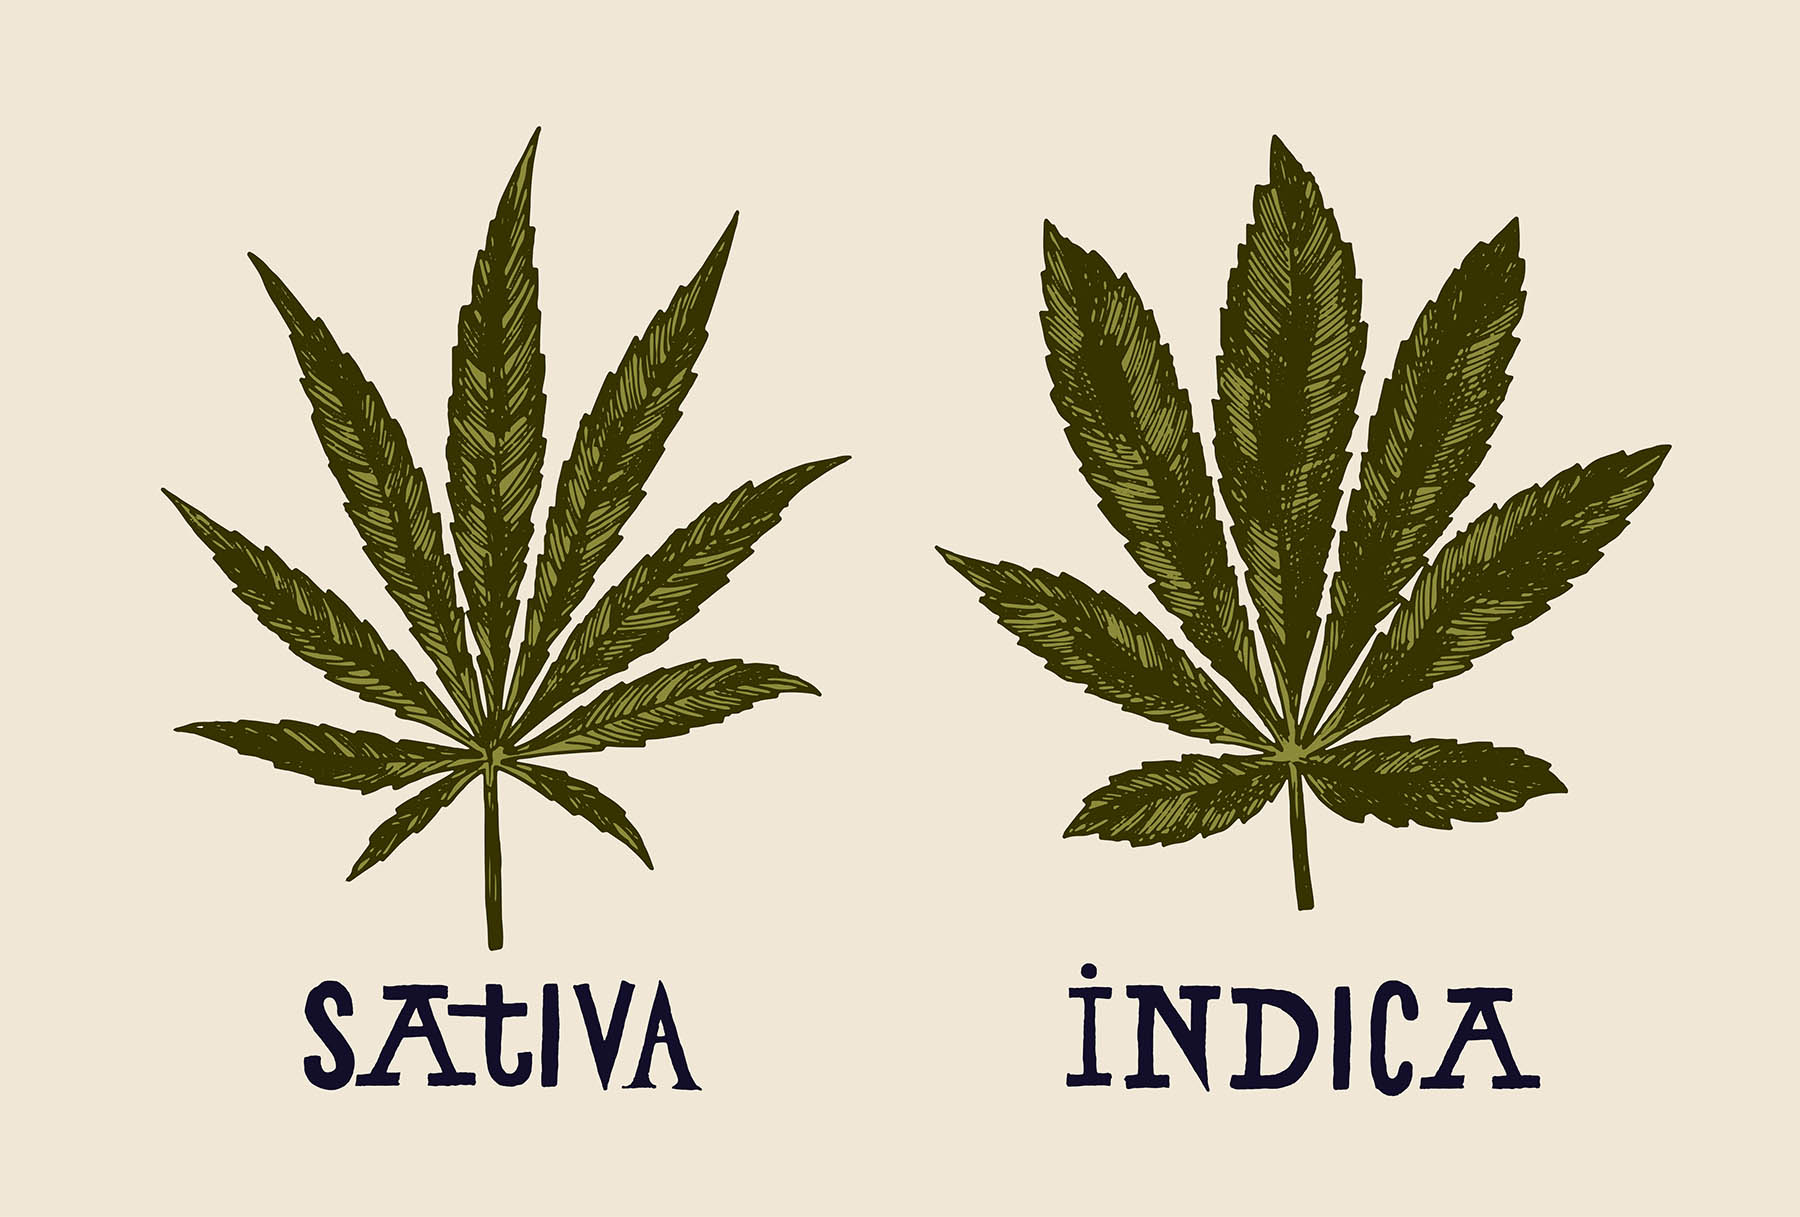 Exploring Cannabis Strains: Sativa, Indica, and Hybrids